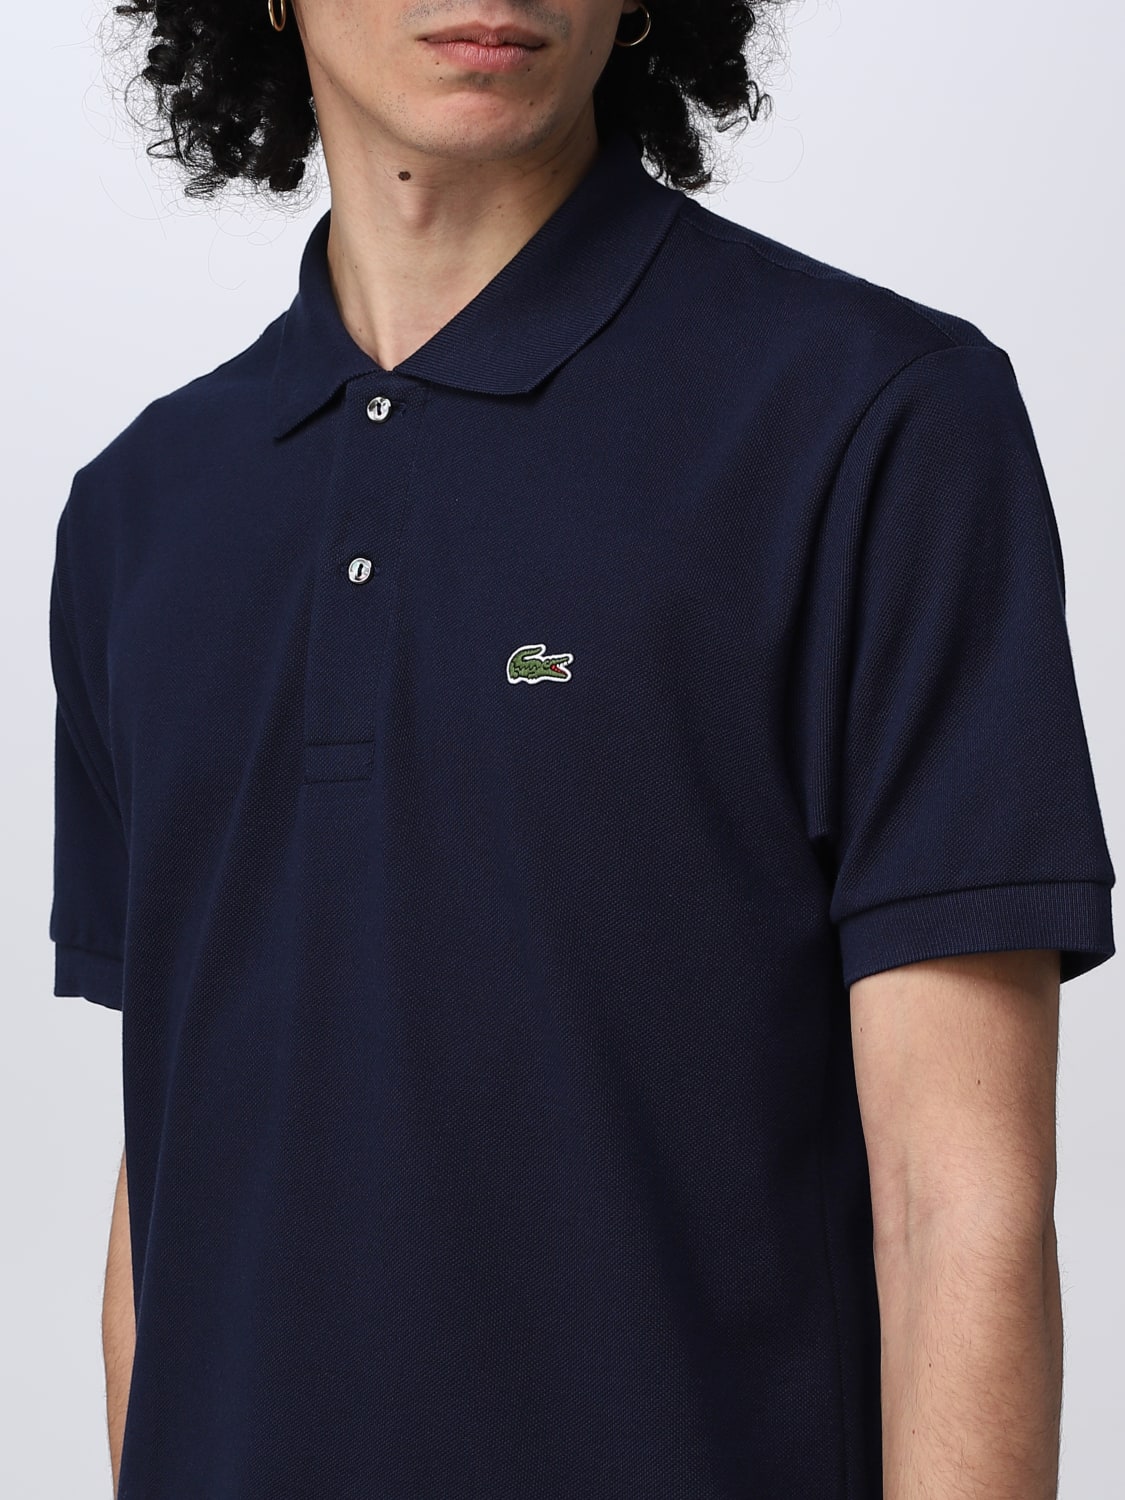 Lacoste Outlet: polo shirt for man - Navy | Lacoste polo shirt L1212 online  at